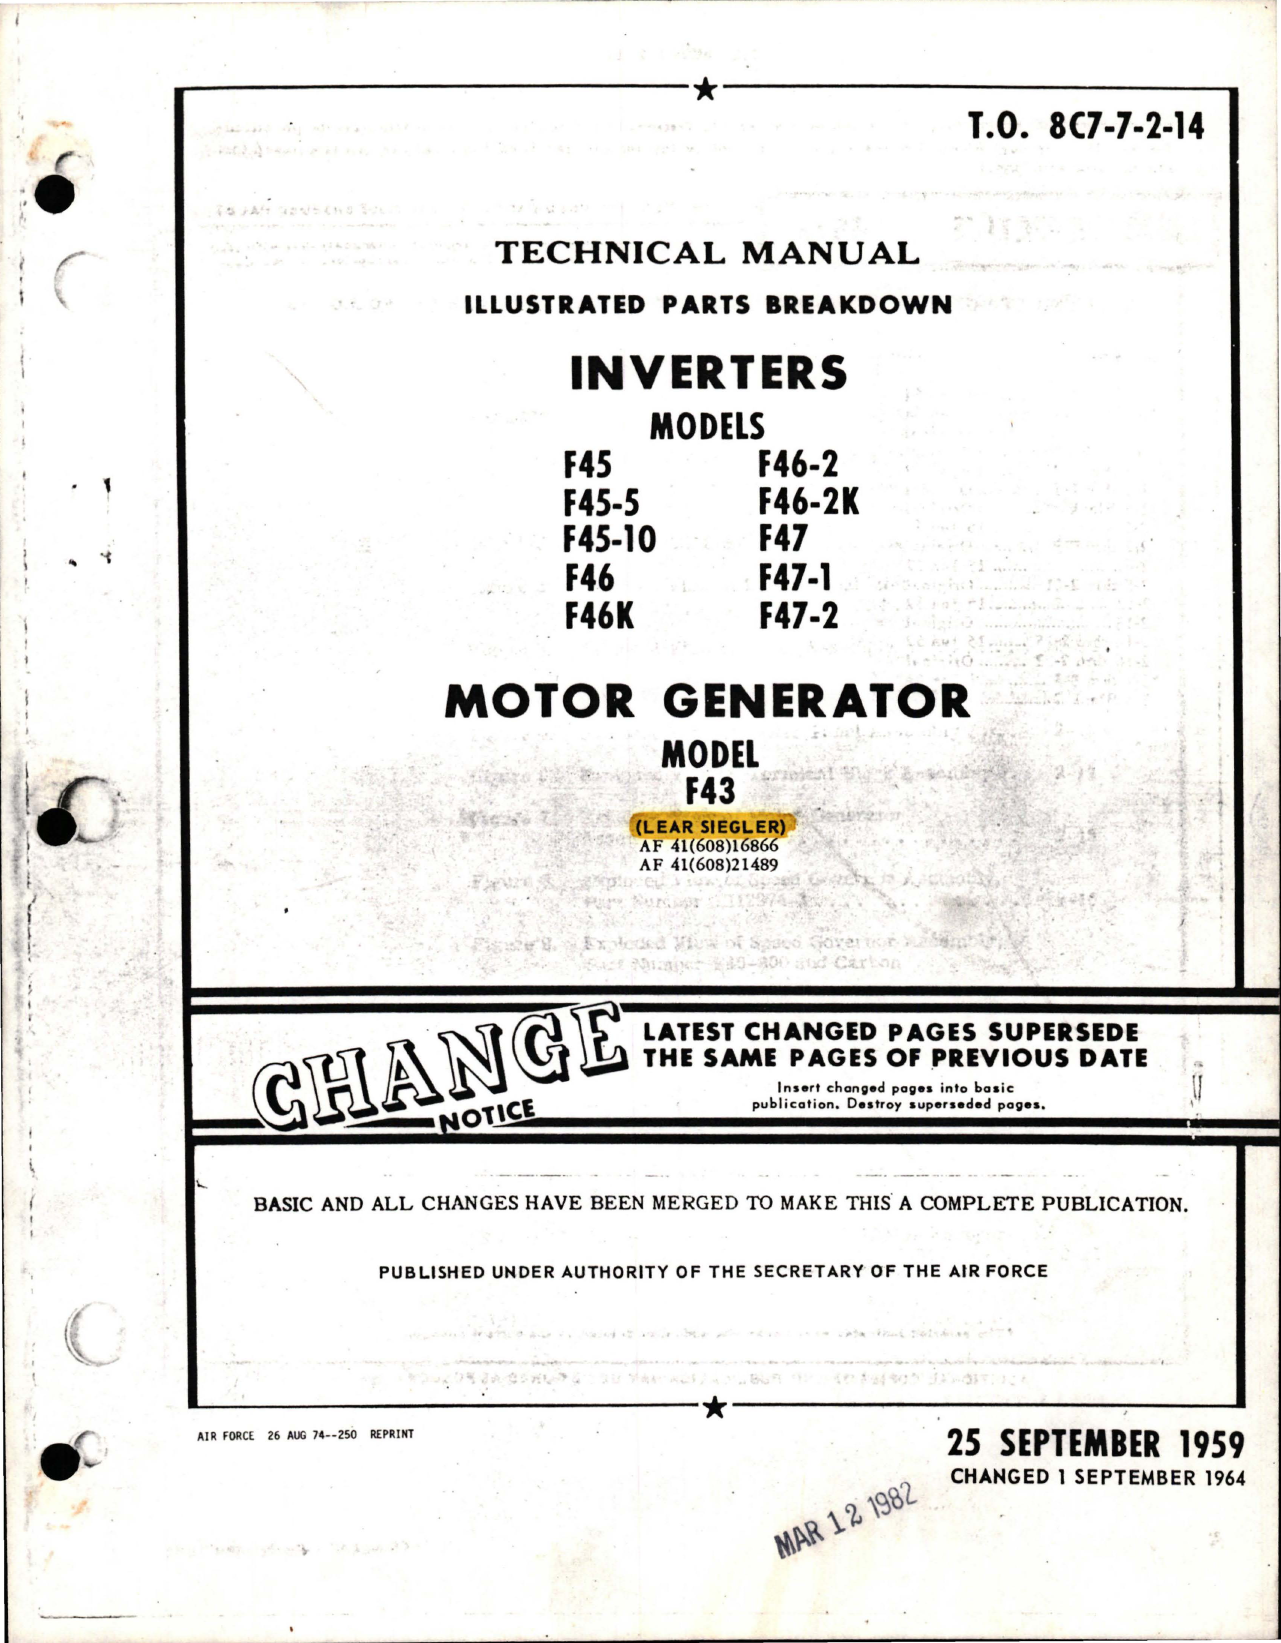 Sample page 1 from AirCorps Library document: Illustrated Parts Breakdown for Inverters and Motor Generator - Model F43